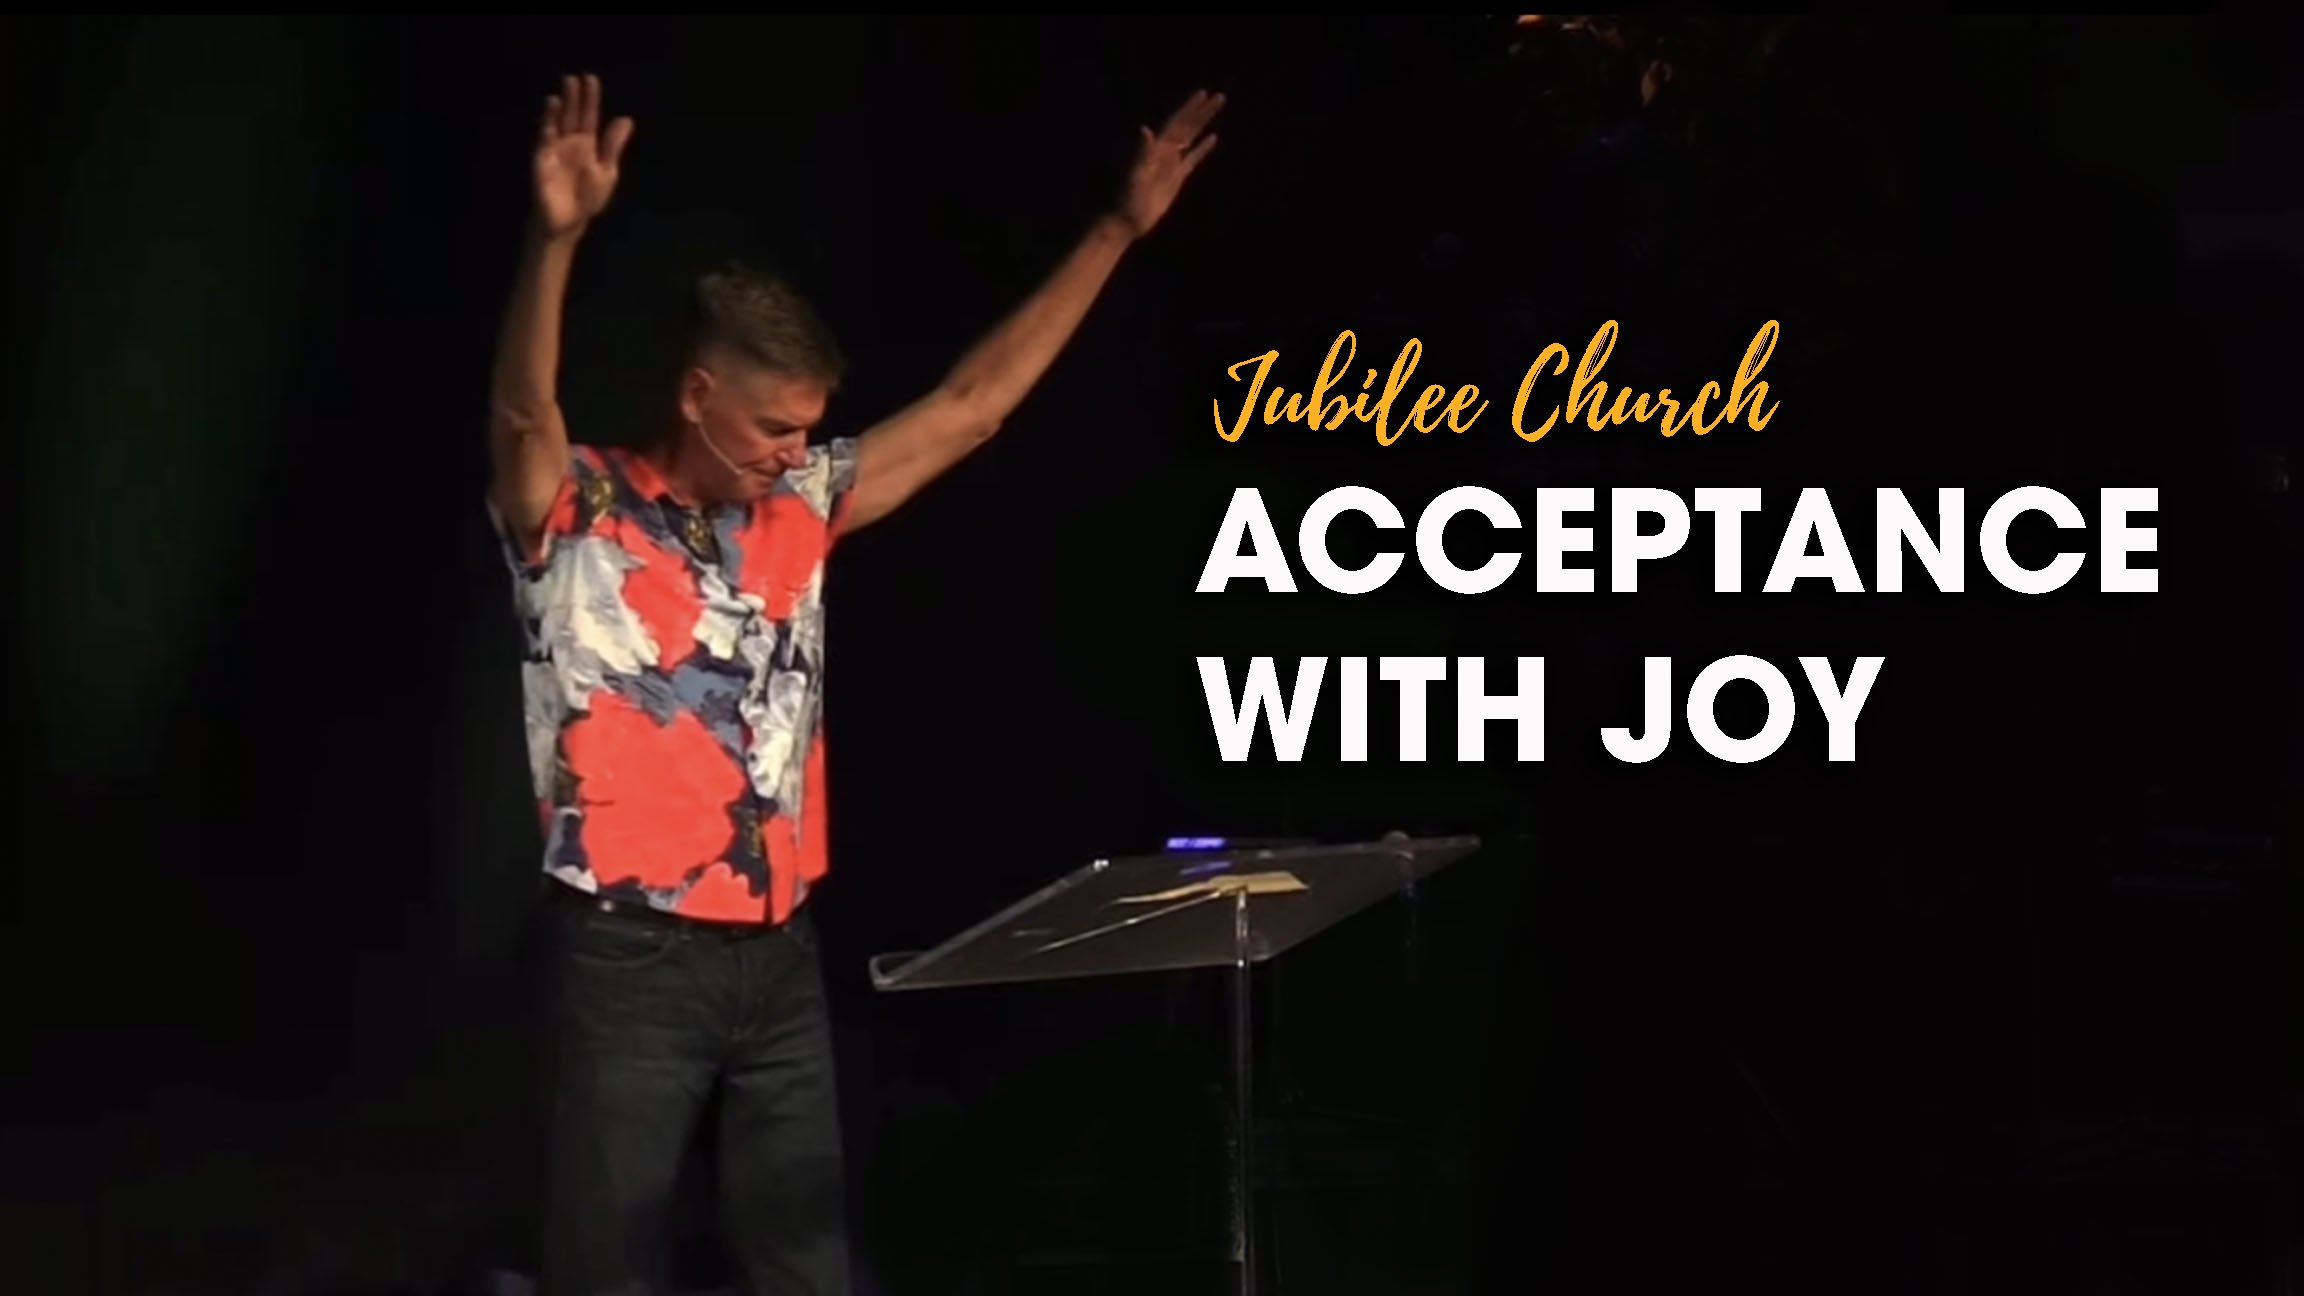 Acceptance with Joy